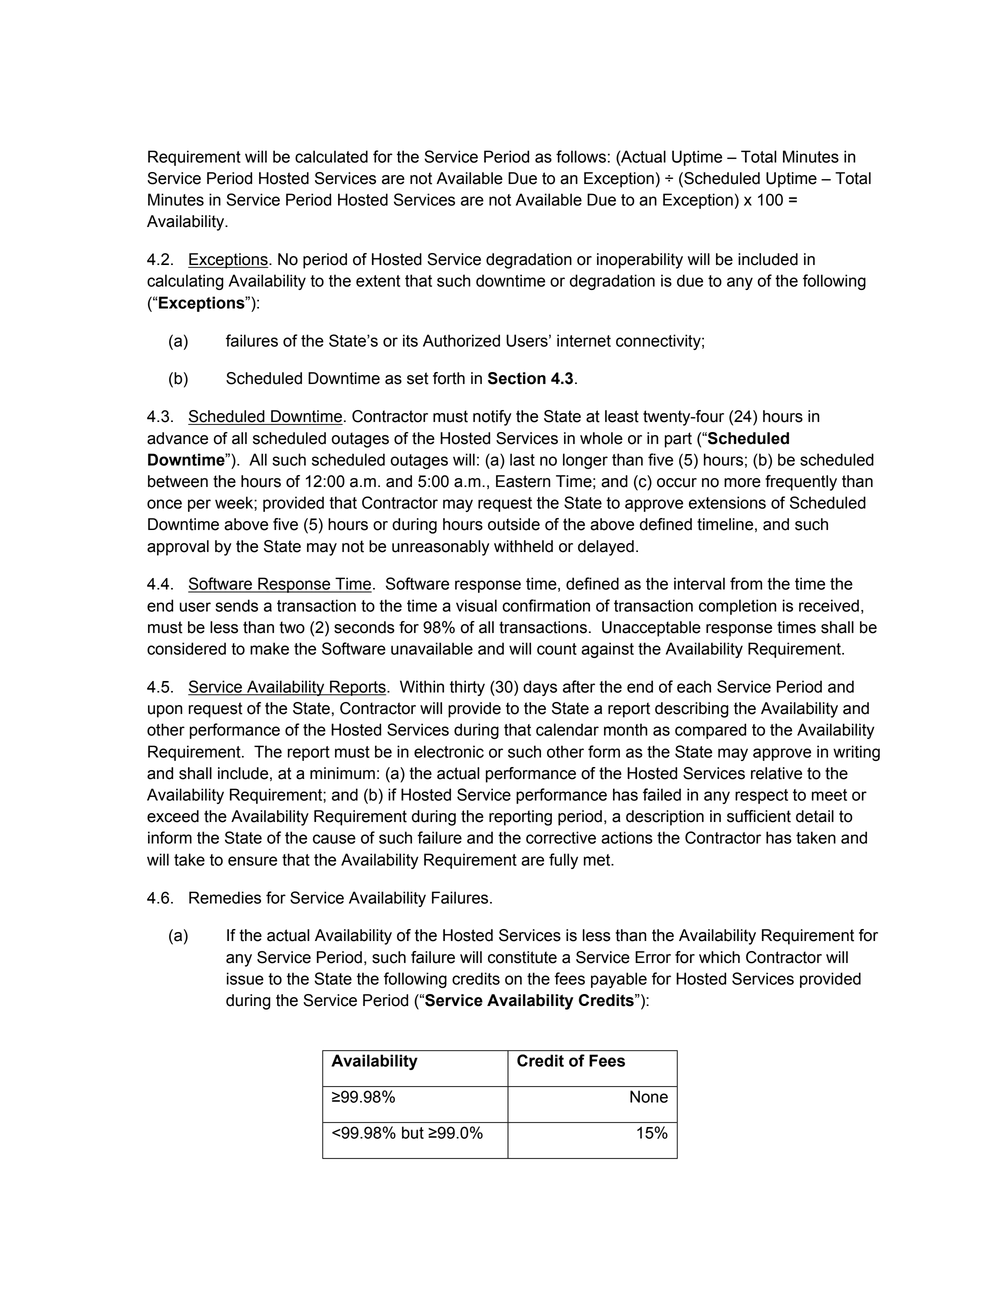 Page 62 from State of Michigan 2020 Kaseware contract